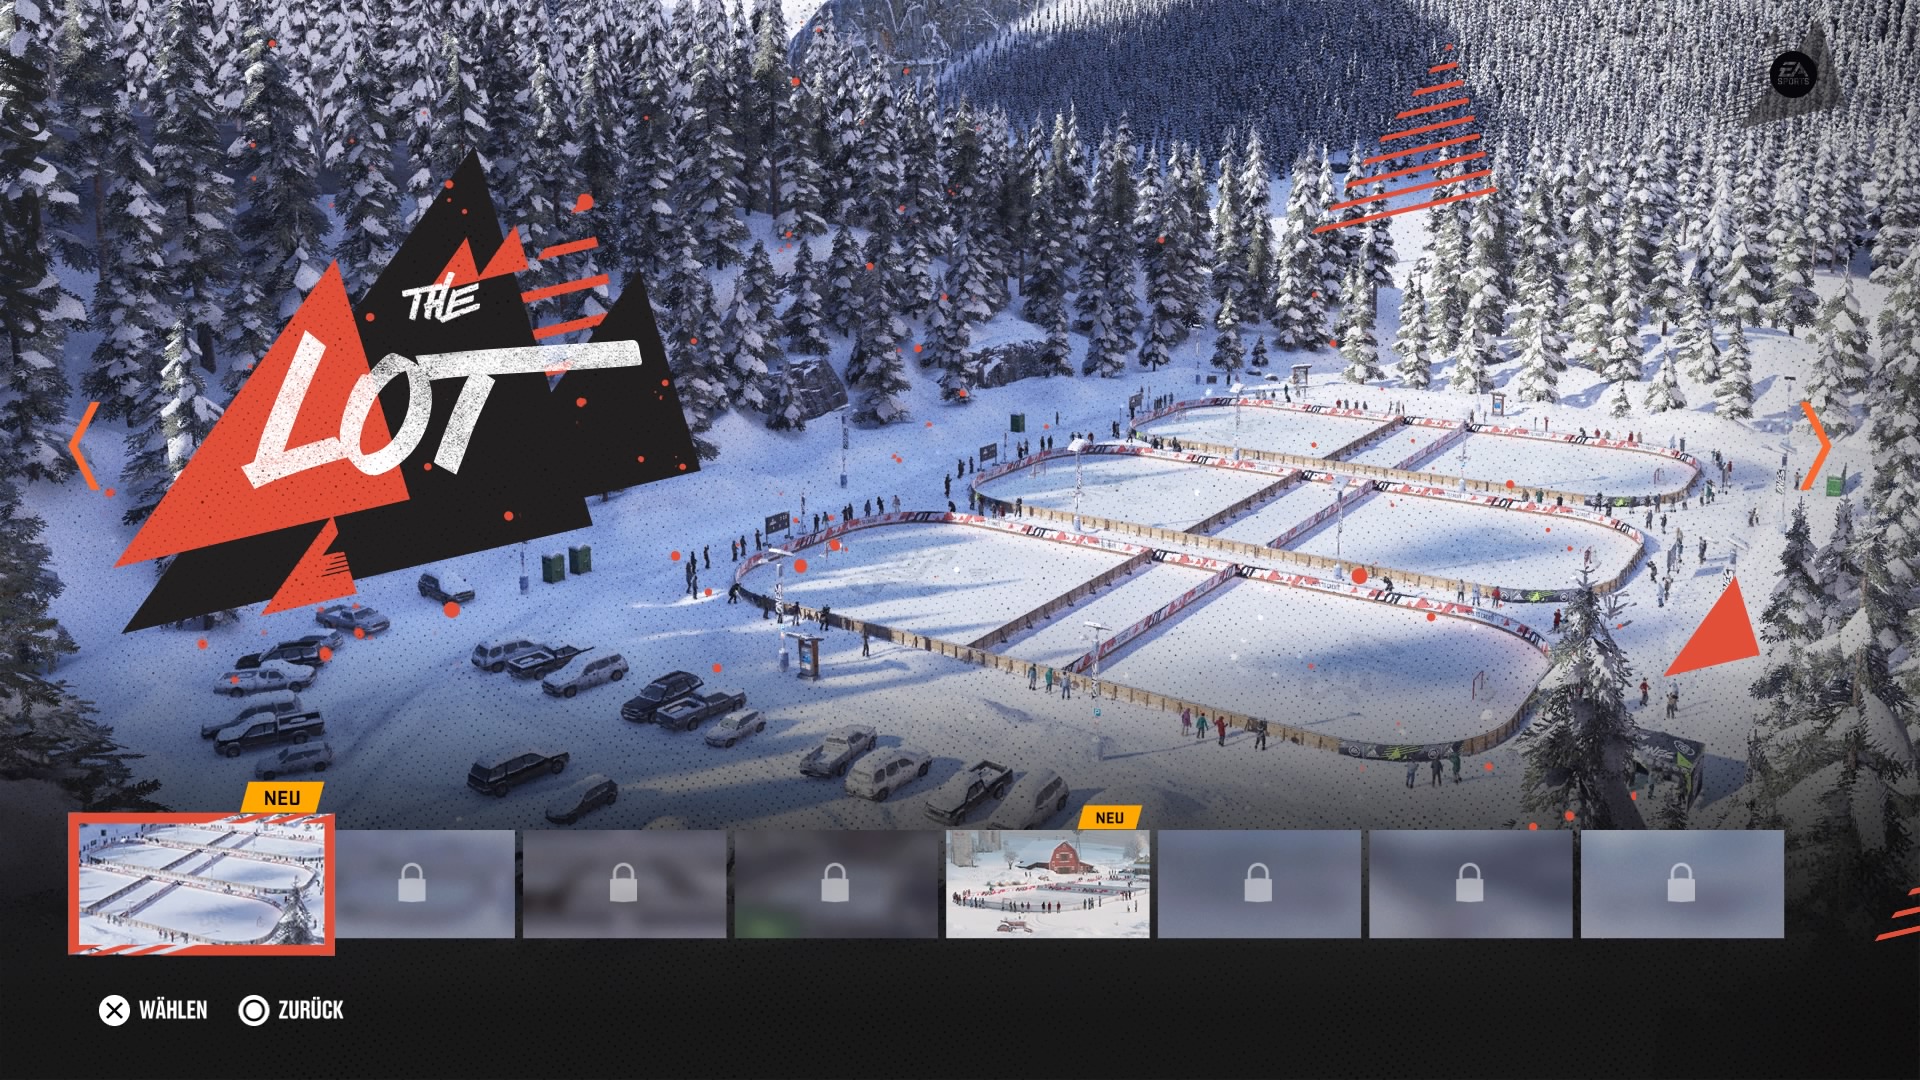 NHL mode The Lot is lots of fun